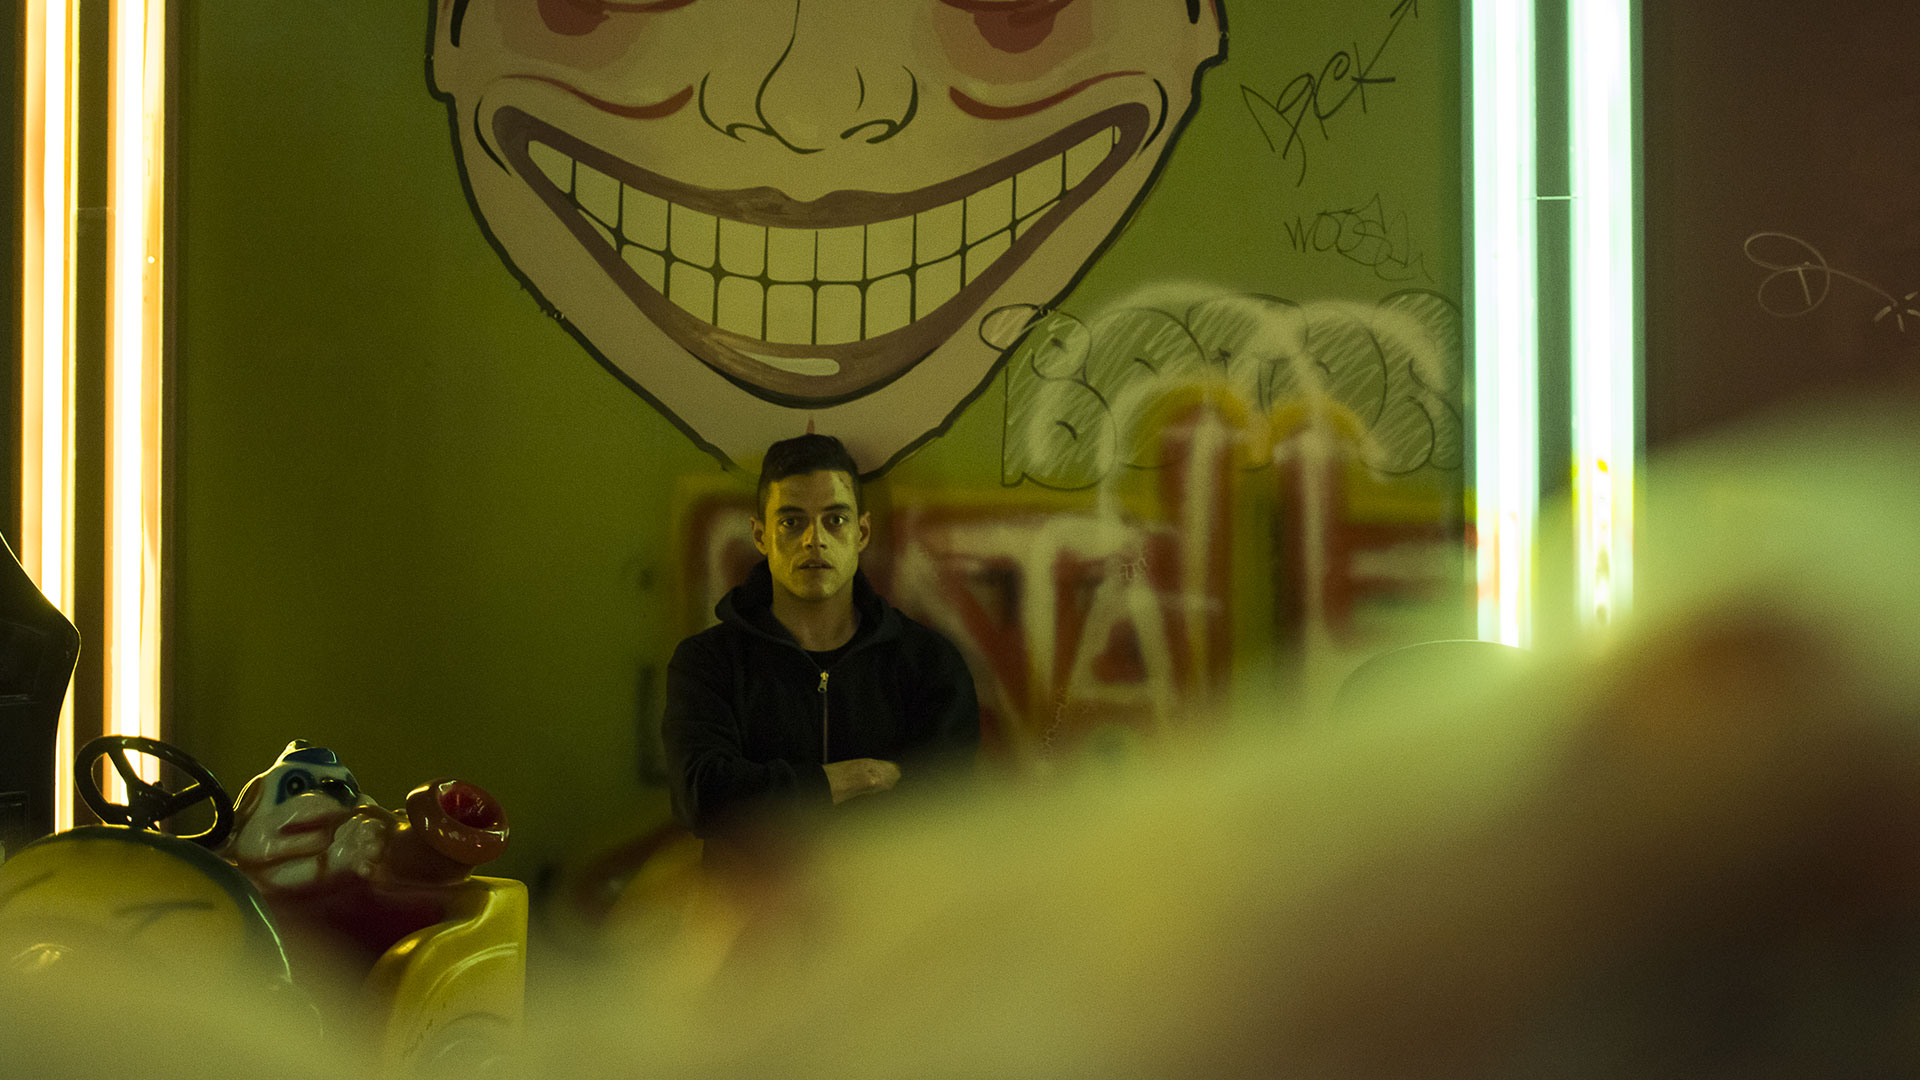 Keeping it real: Mr. Robot Episode proves the show is bigger than hacking (spoilers) - SiliconANGLE